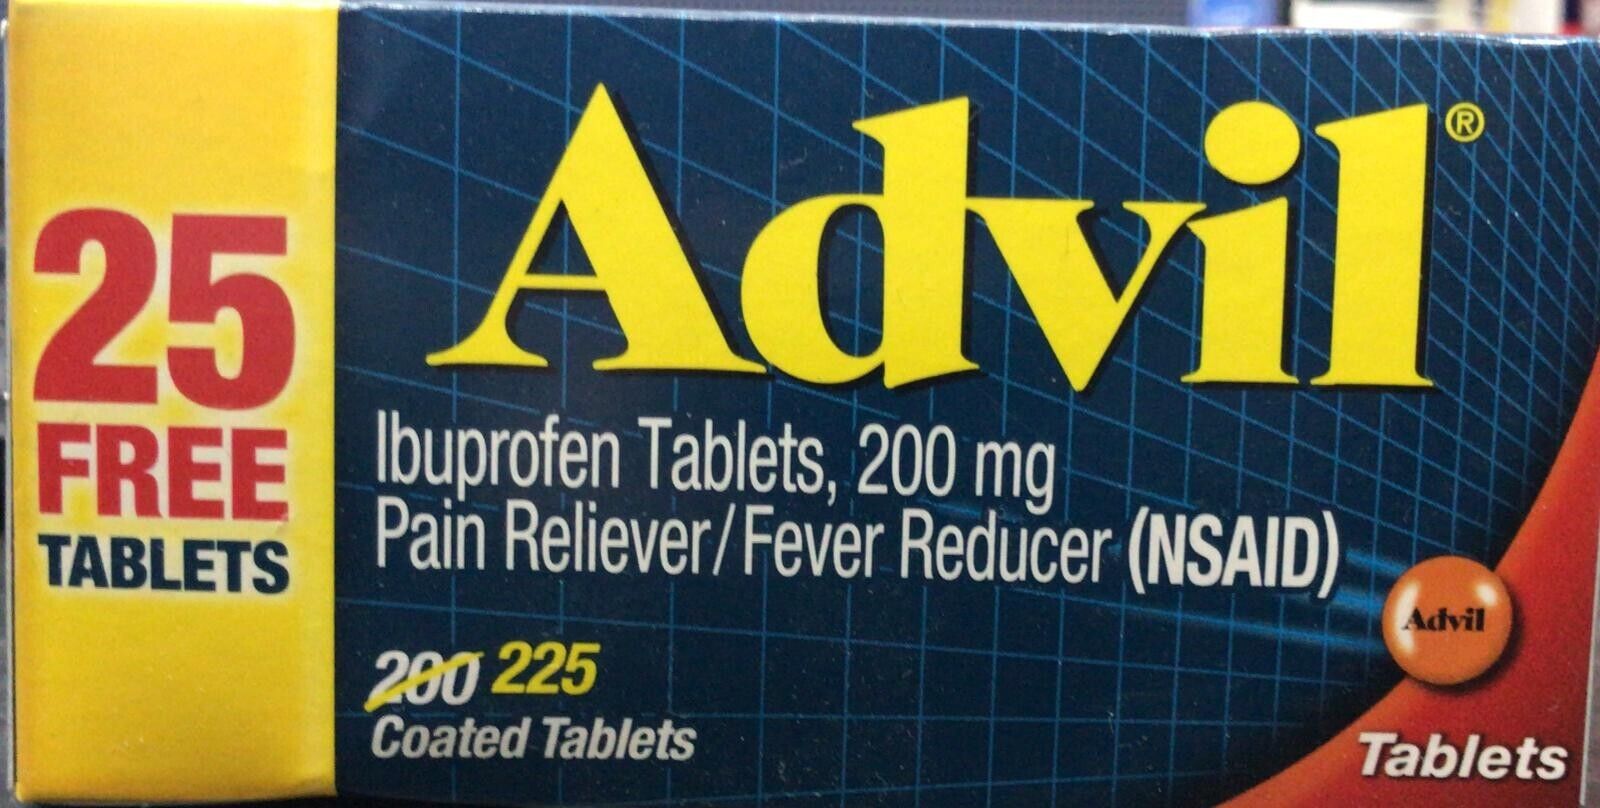 Advil Tablets 200mg 225 coated tablet   EXP. 08/2024+ (A6)